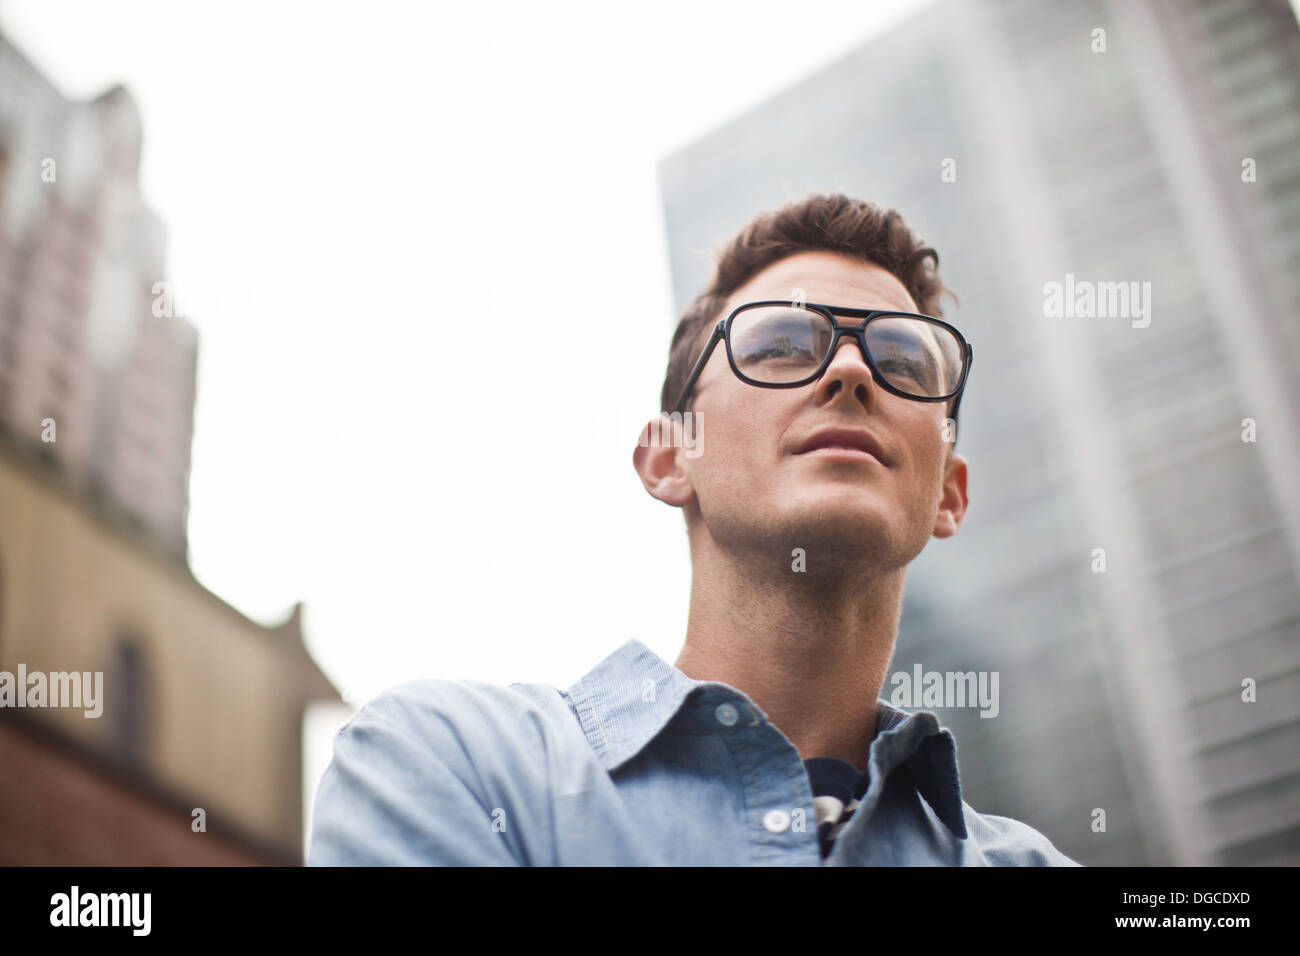 Young man in spectacles looking away, low angle view Stock Photo